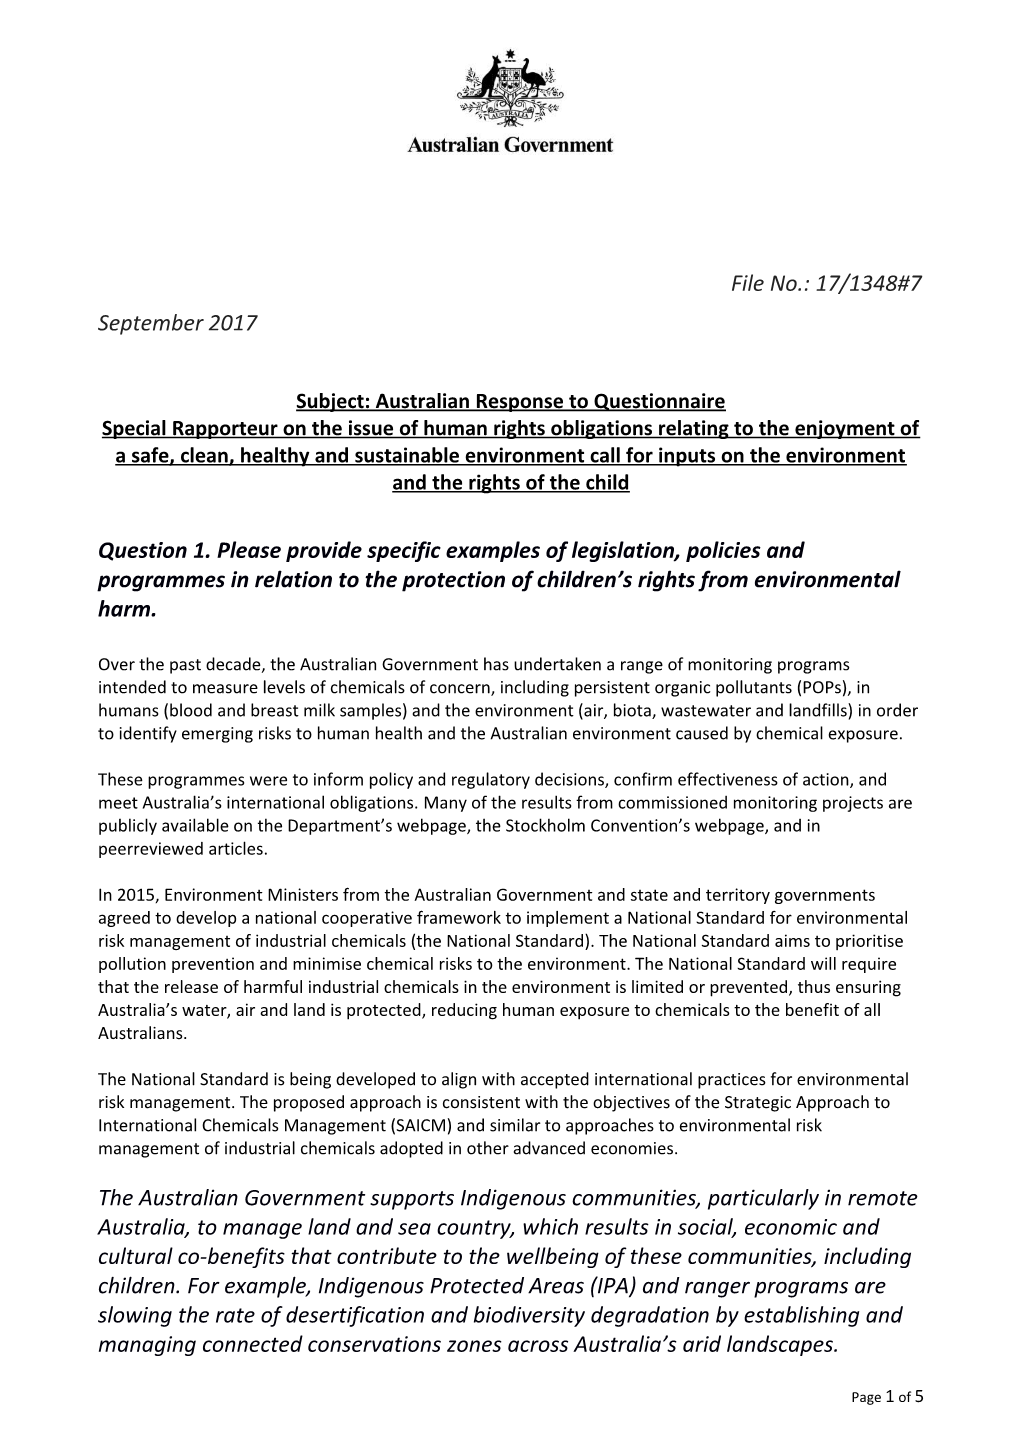 Subject: Australian Response to Questionnaire Special Rapporteur on the Issue of Human